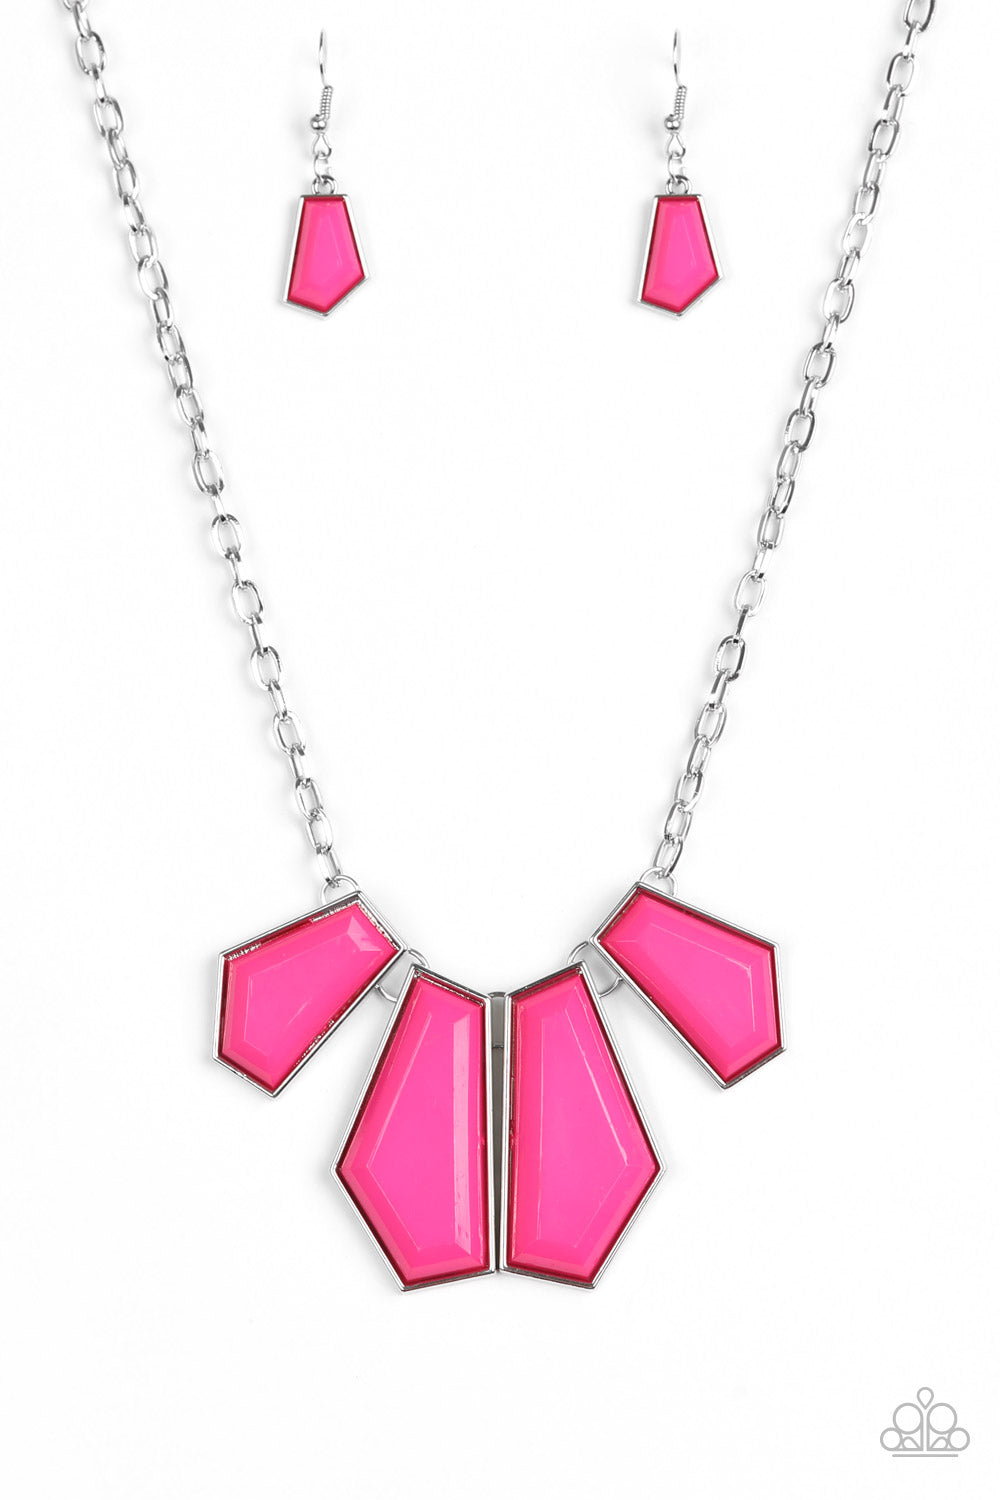 Get Up and GEO - Pink necklace